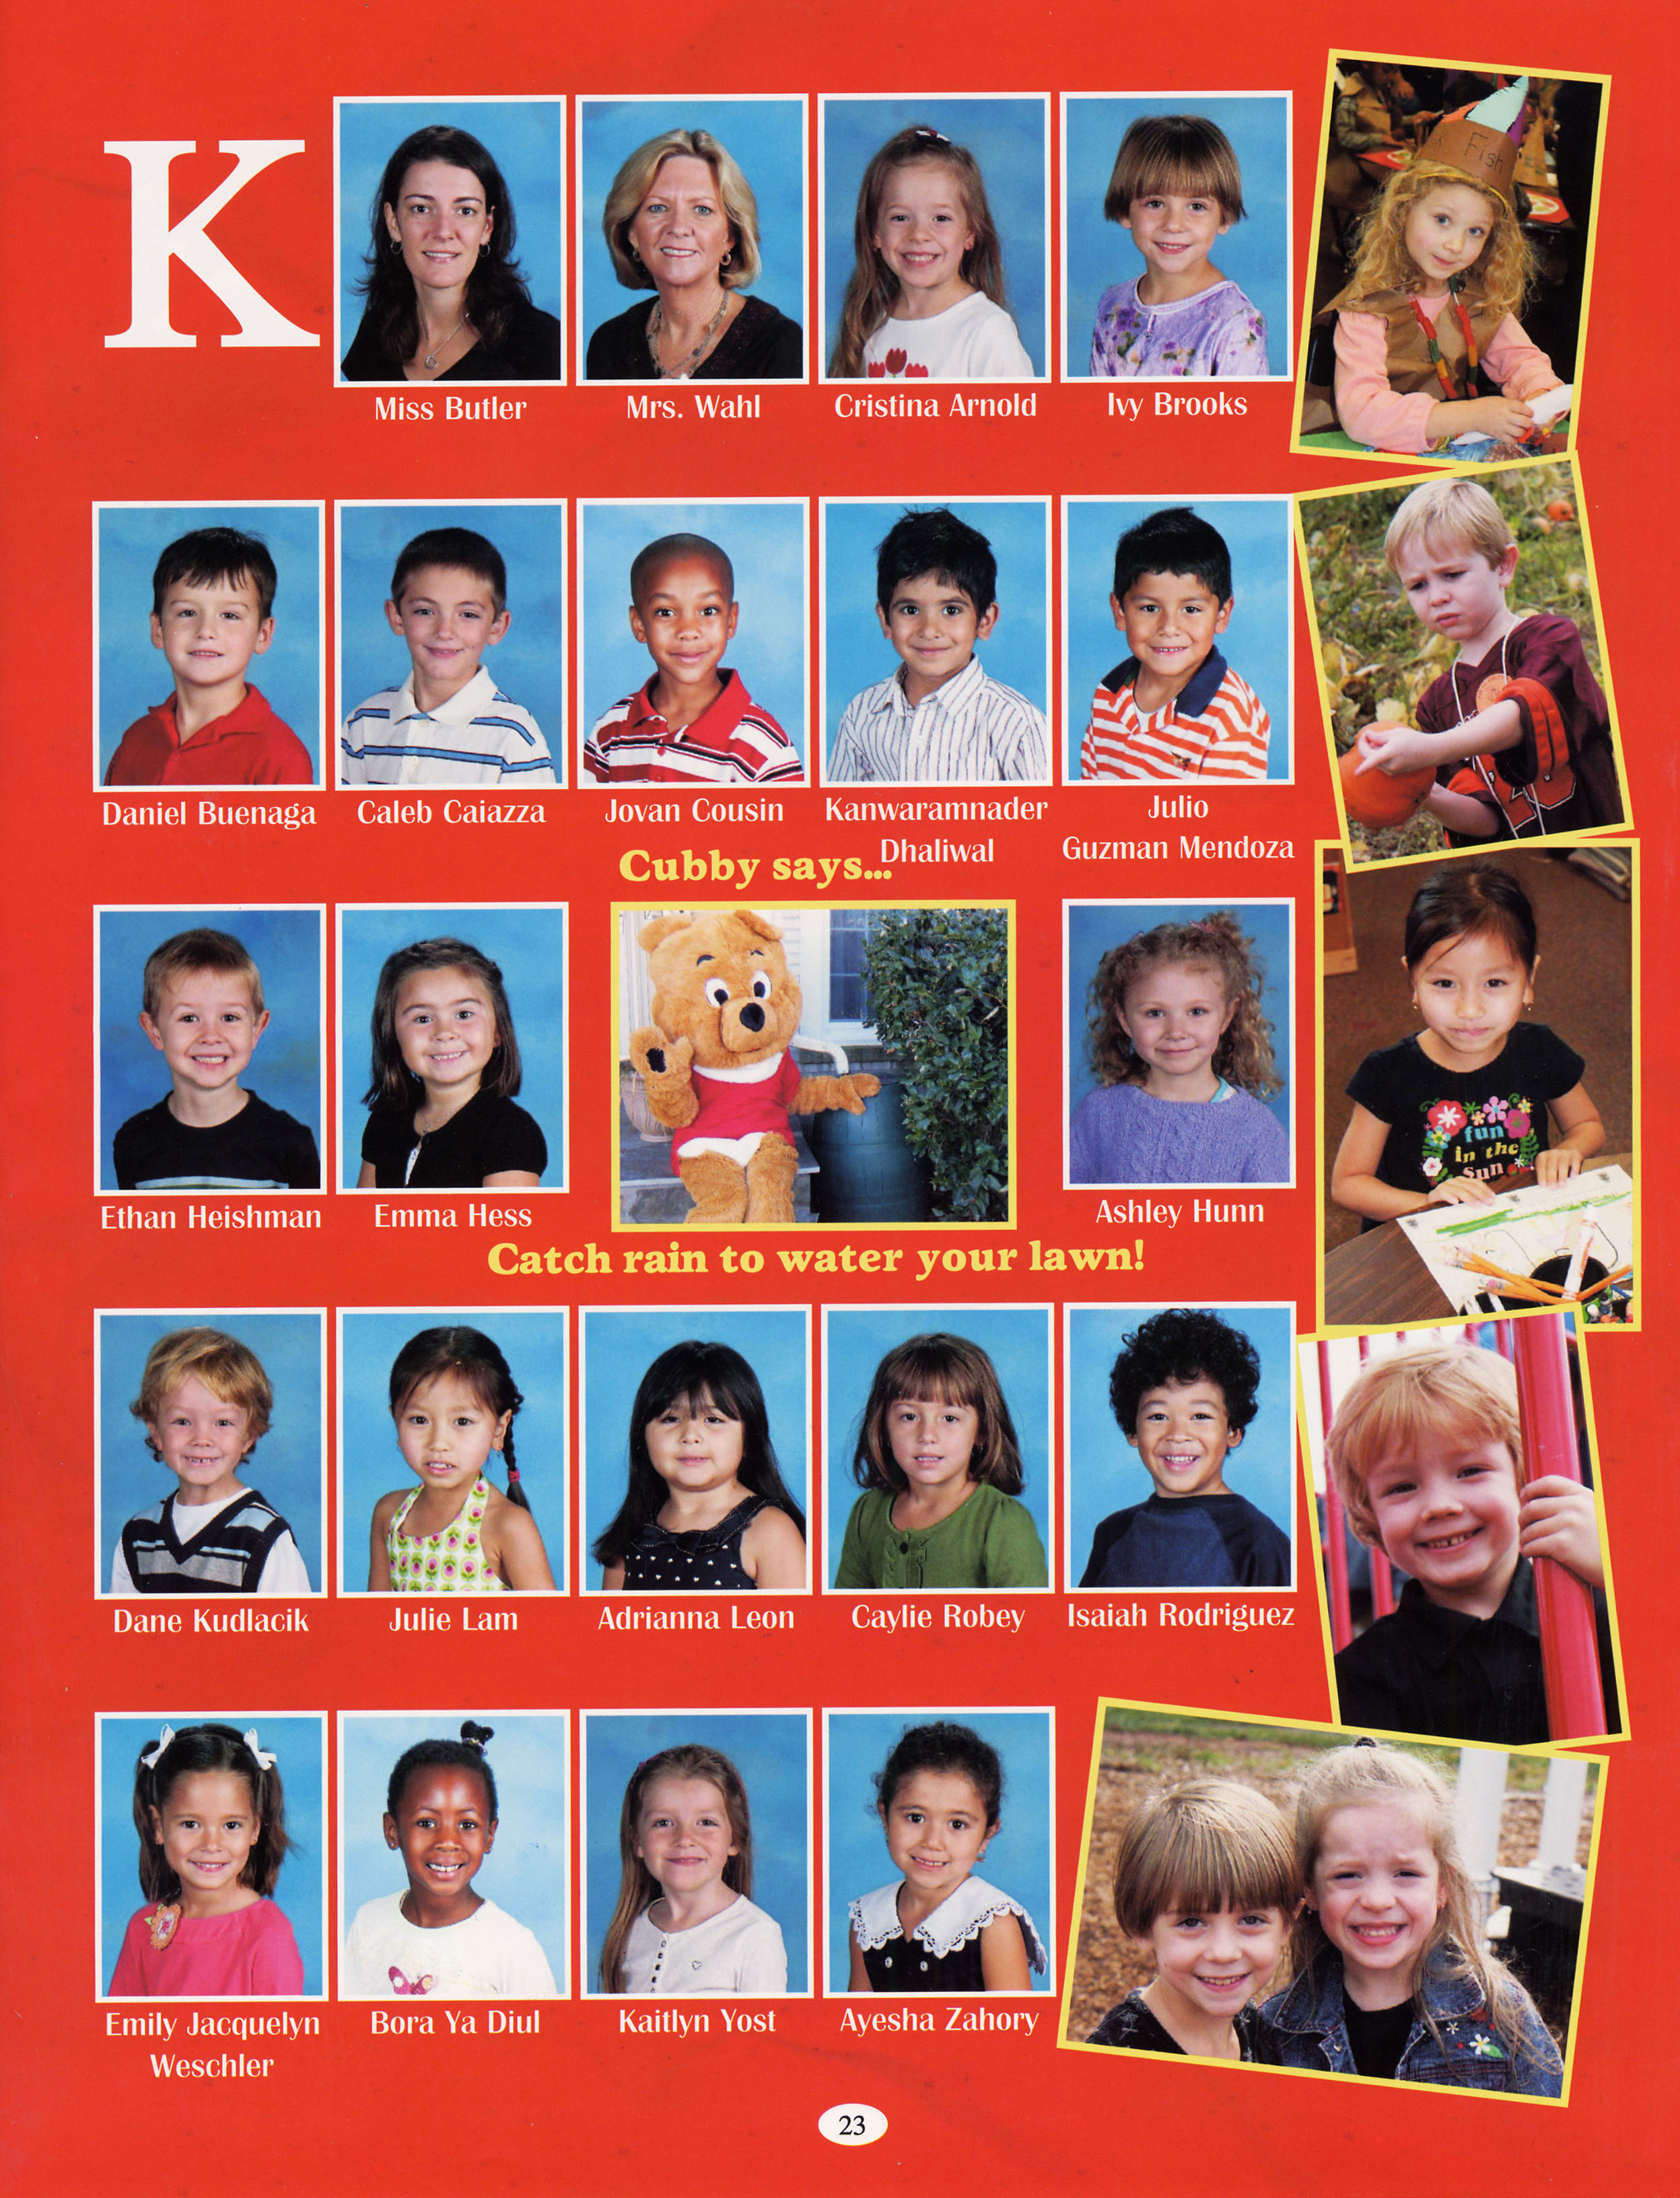 Yearbook Ideas For Elementary School Photos   Good Pix Gallery